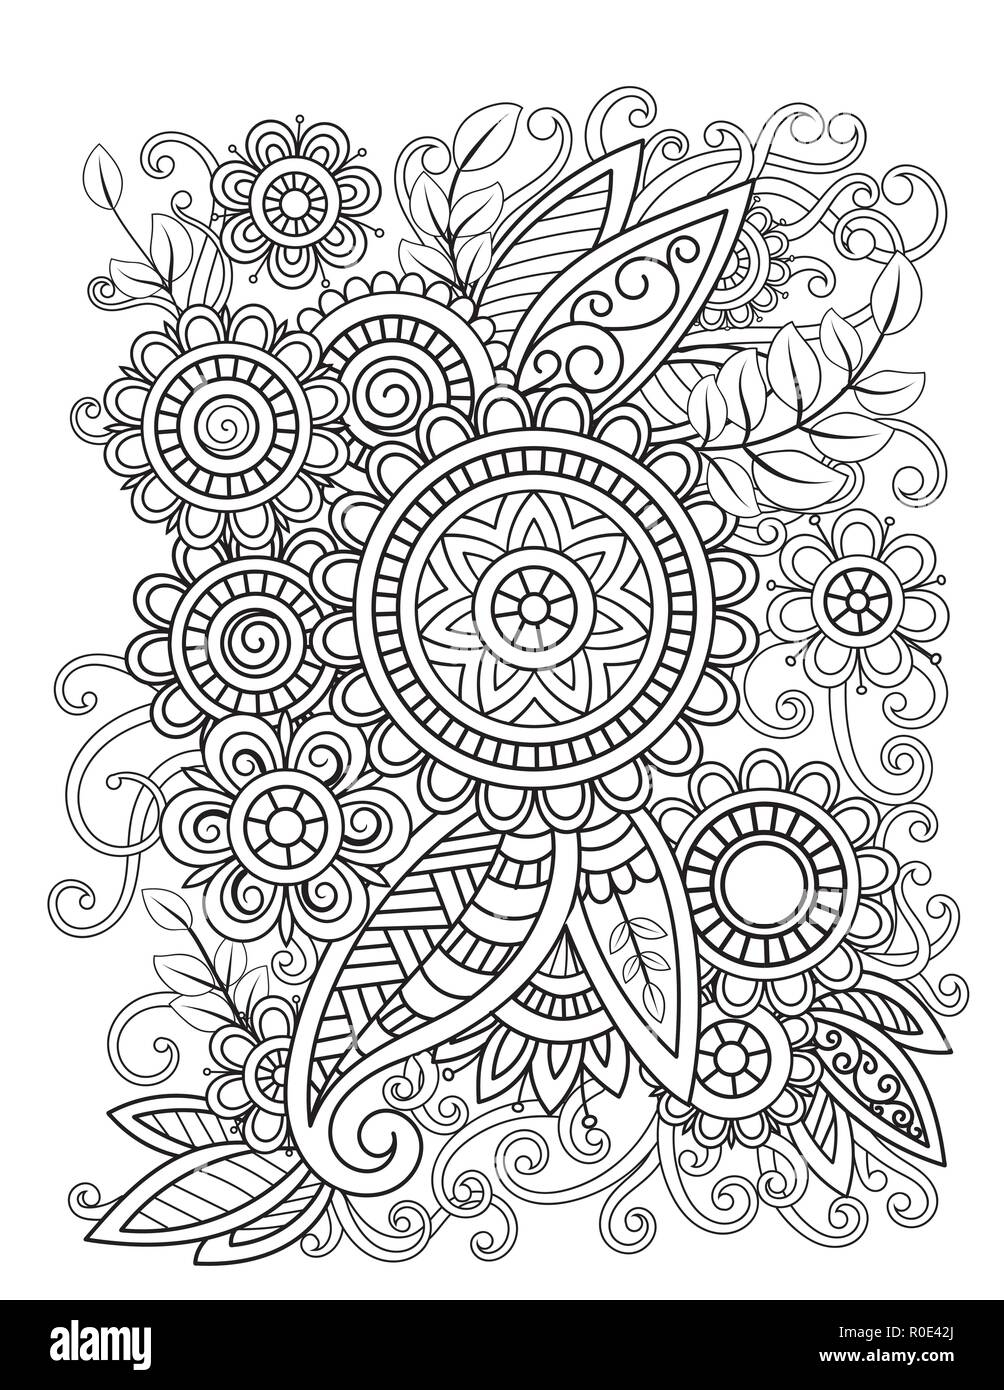 Download Adult coloring page with oriental floral pattern. Black ...